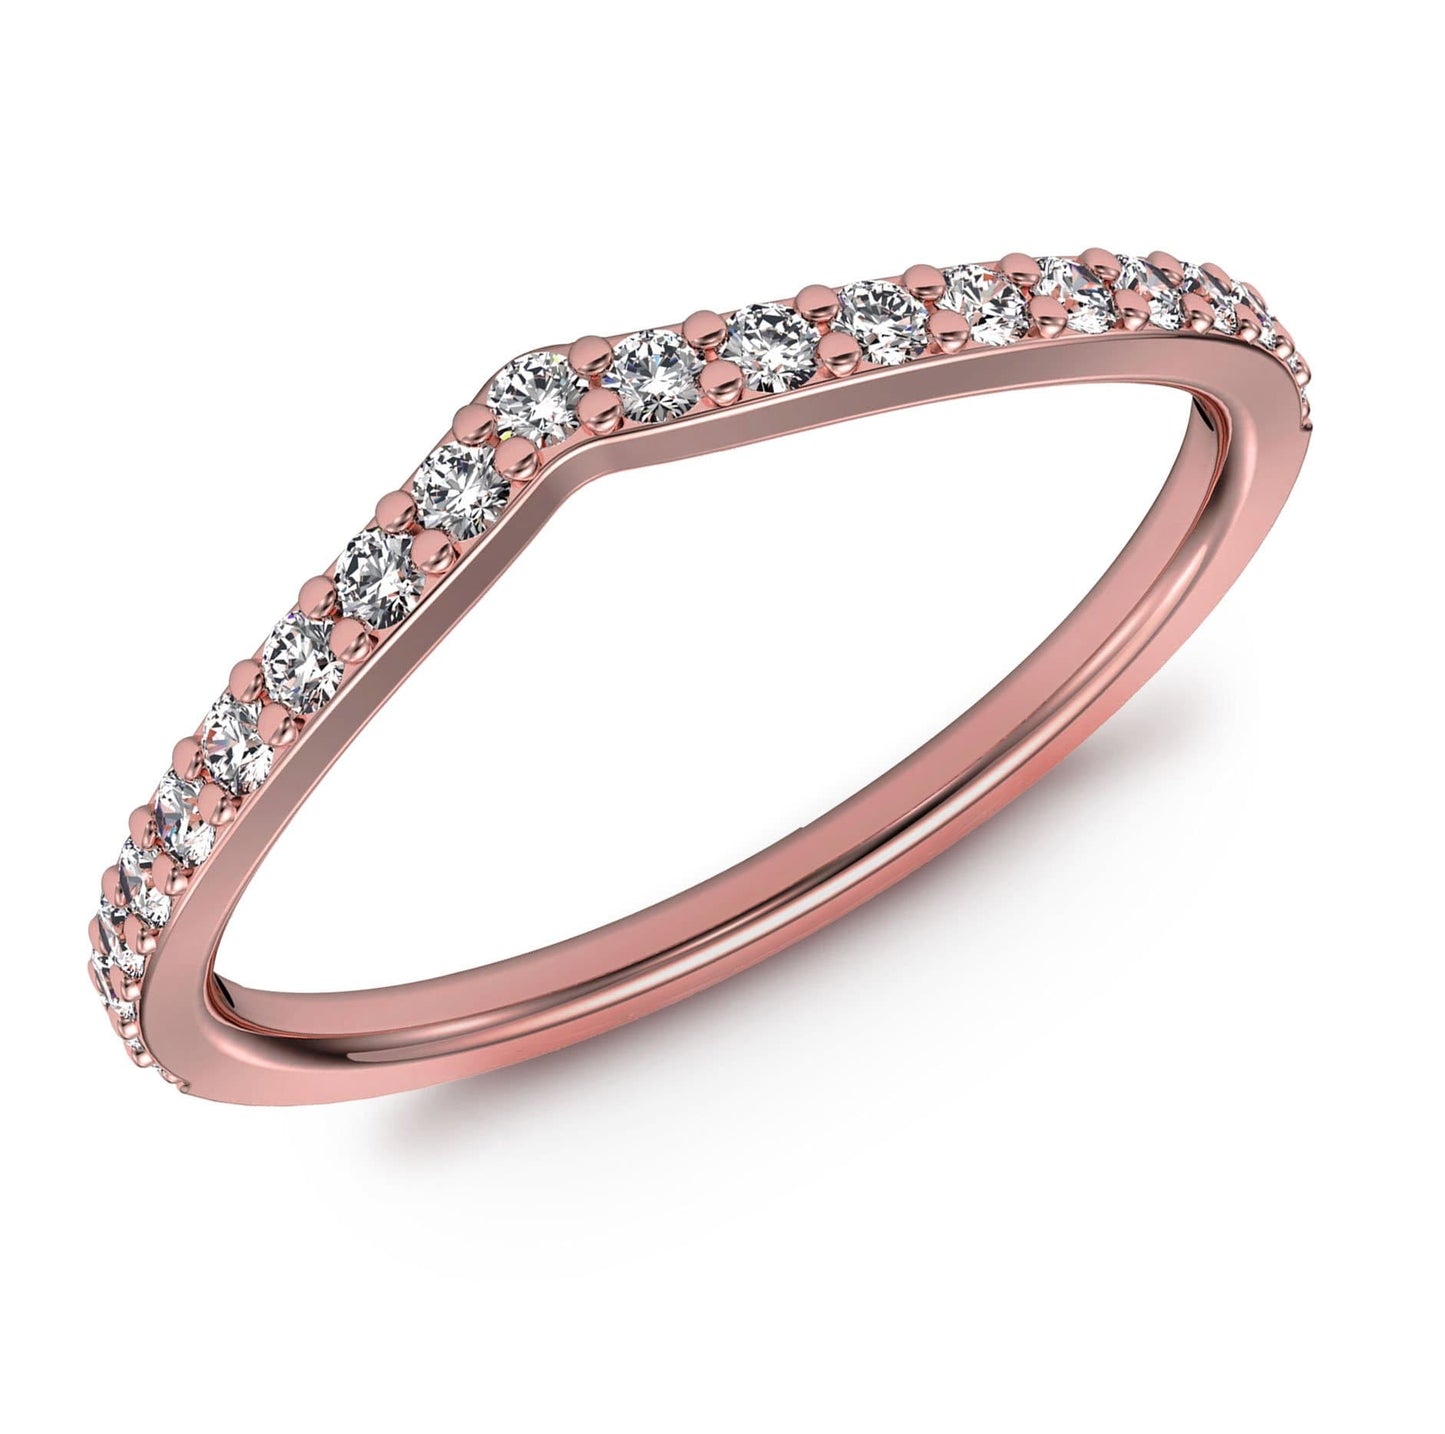 Curved Diamond Ring in 14k Gold